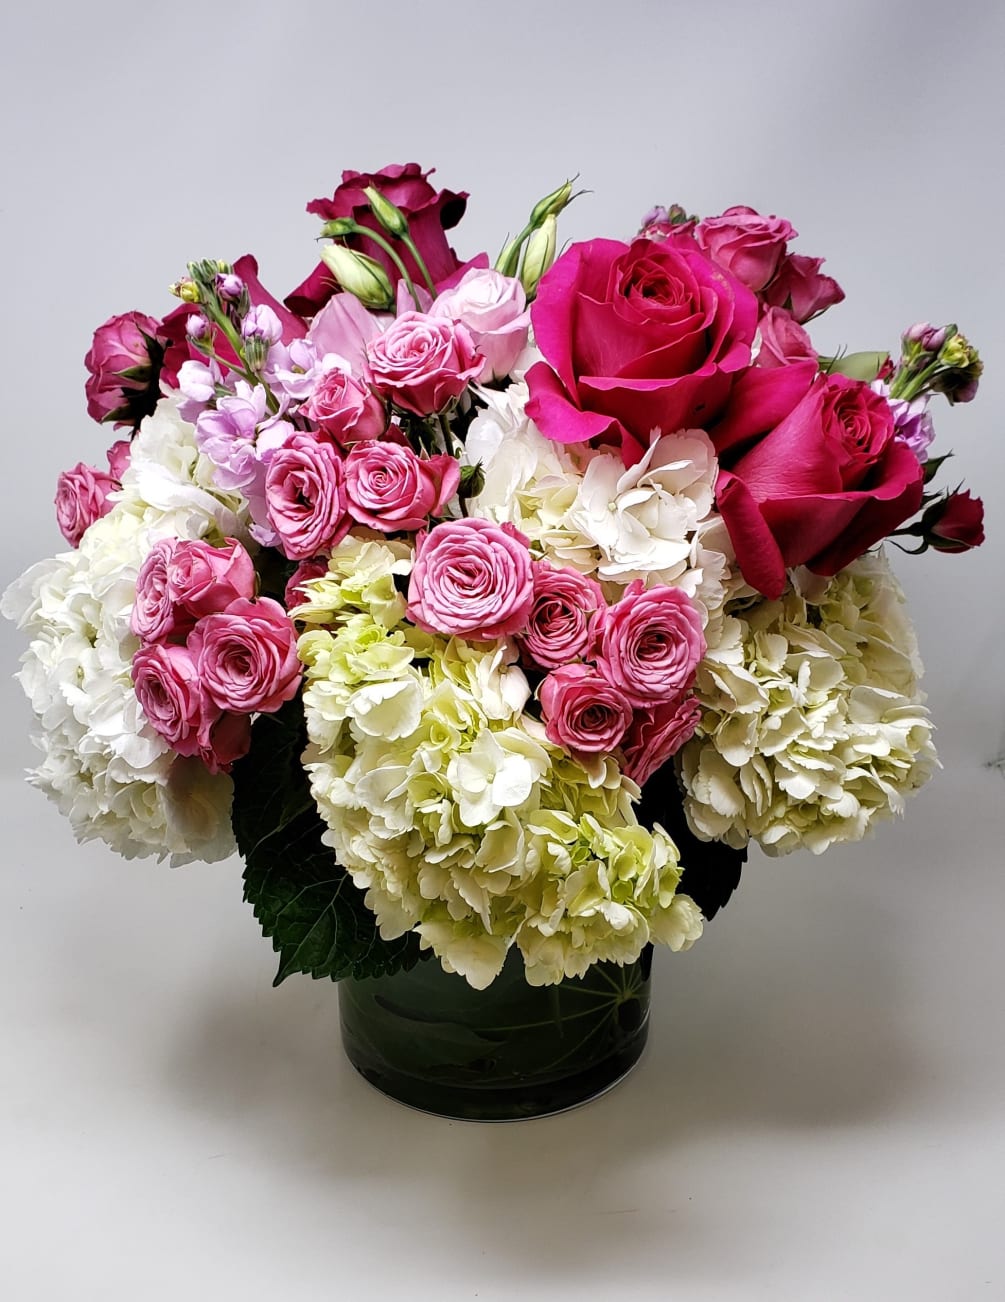 A full lush and pretty feminine bouquet with hydrangeas, roses, fragrant stock